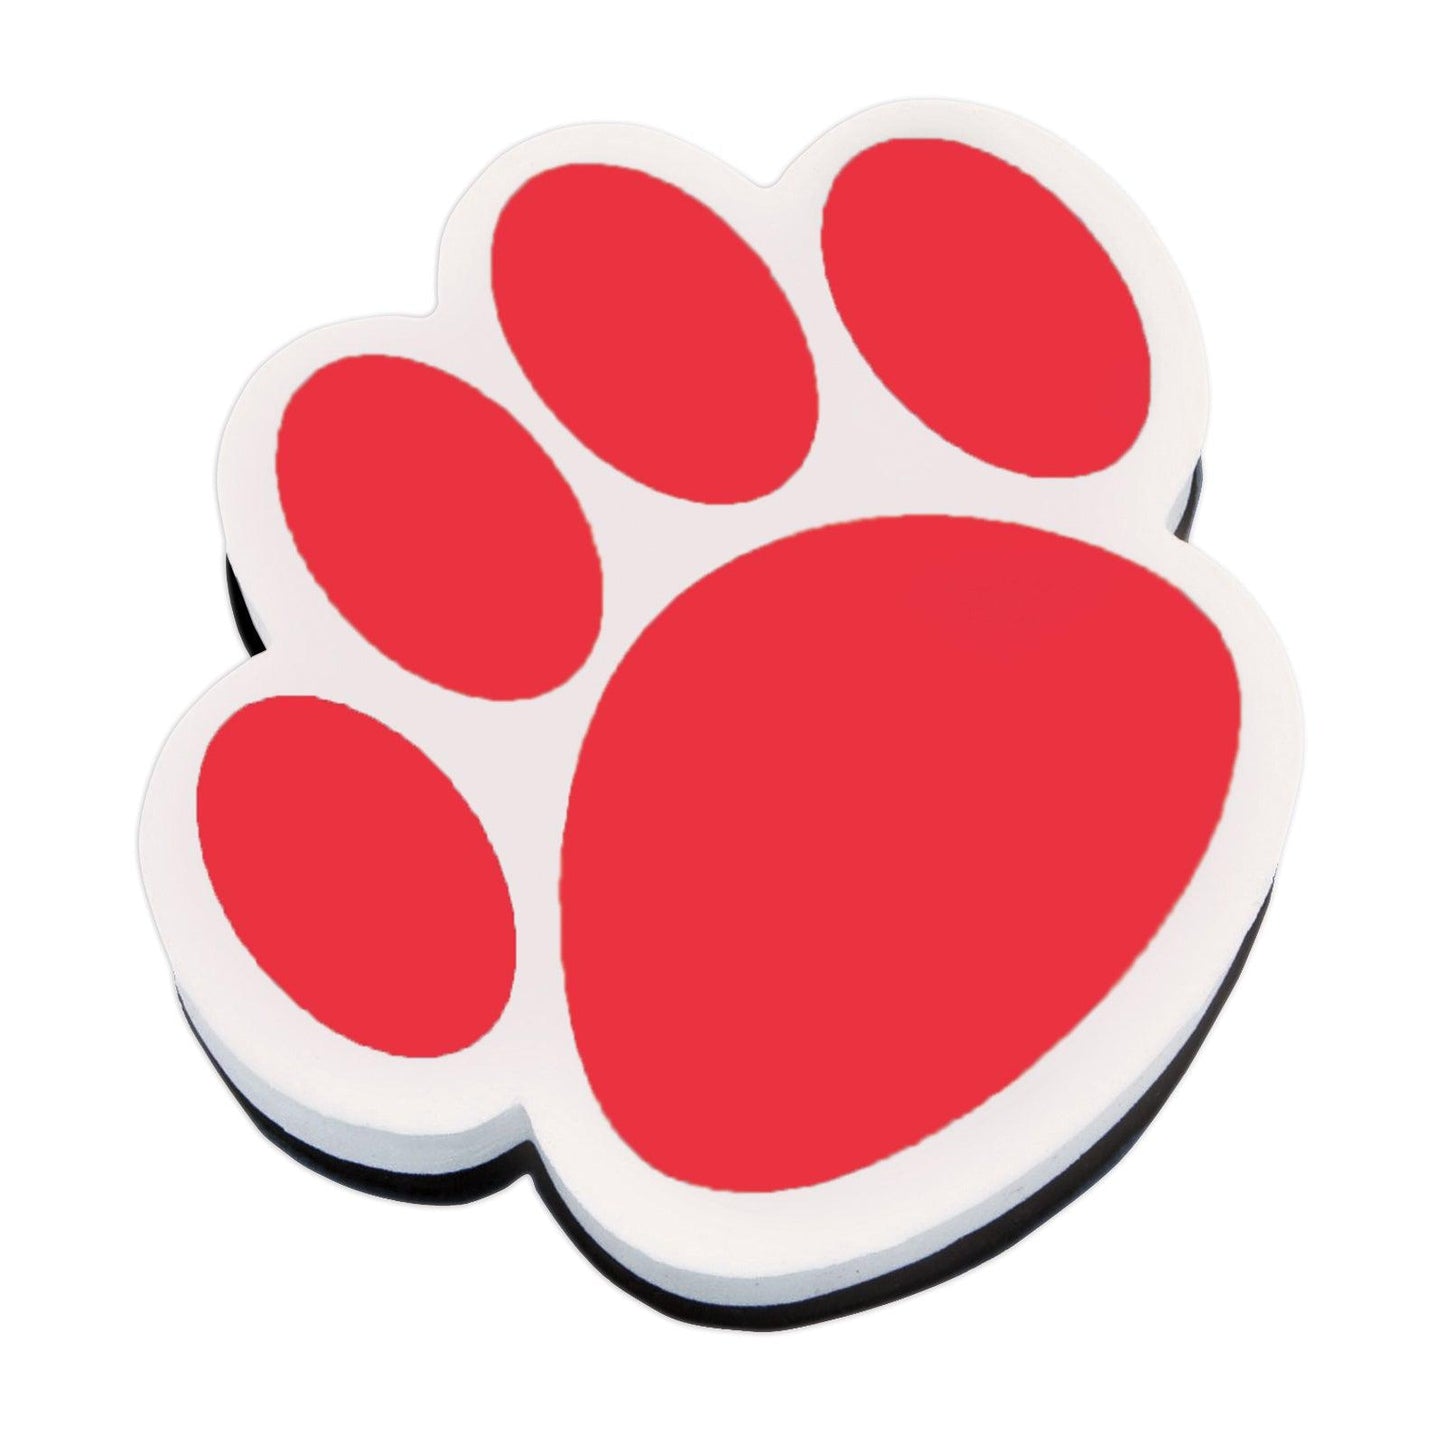 Magnetic Whiteboard Eraser, Red Paw, Pack of 6 - Loomini